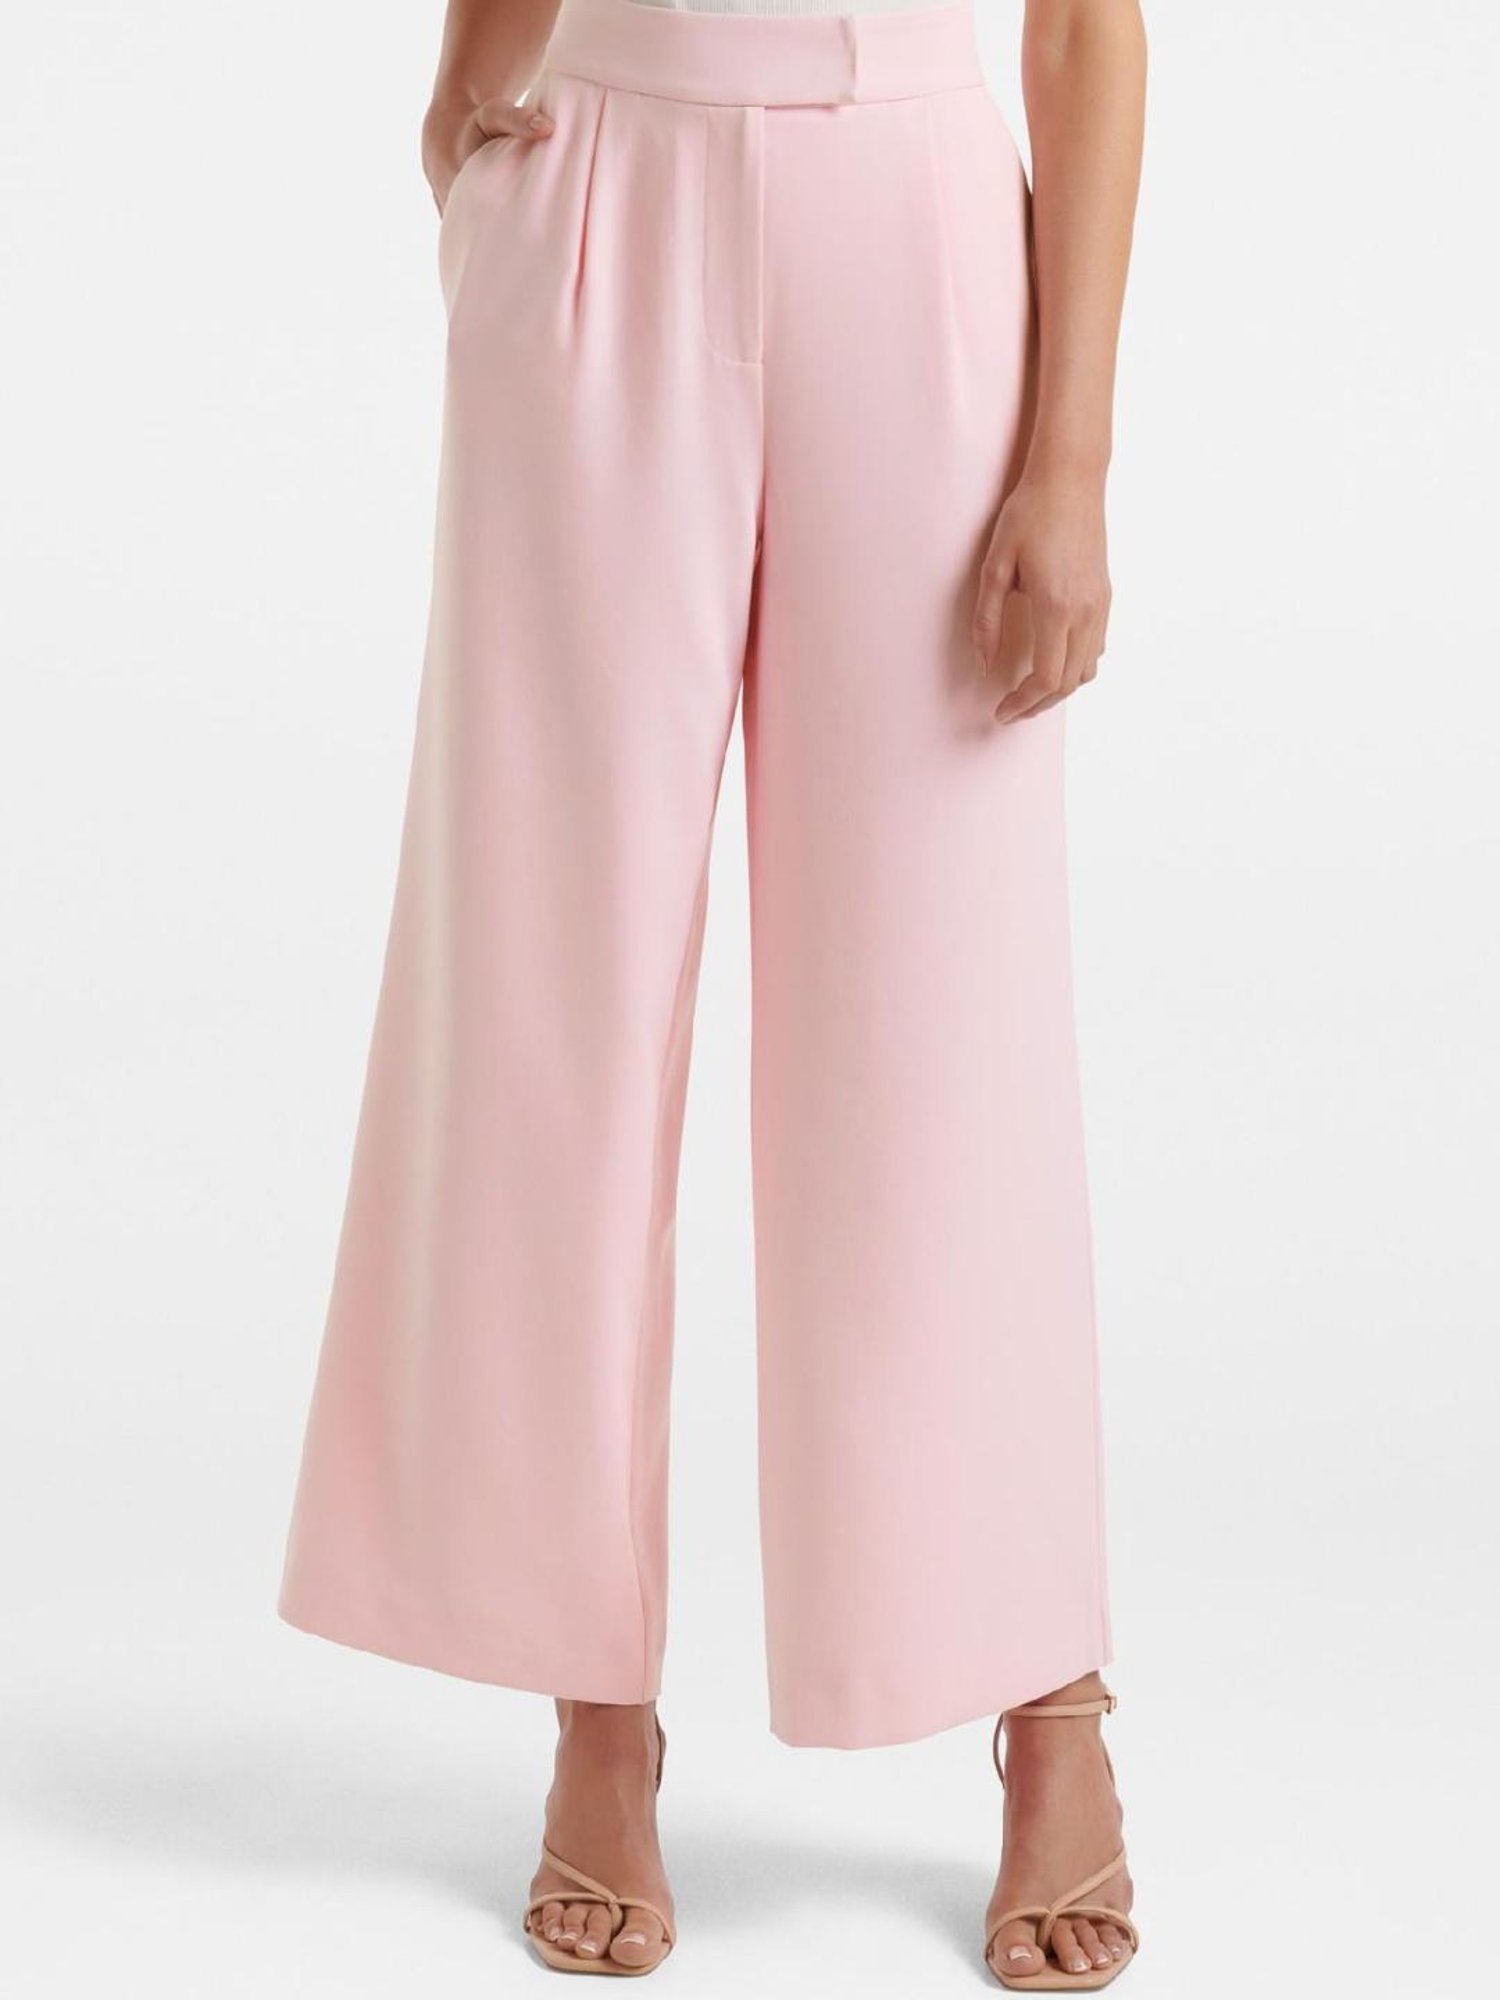 Buy Pink Mid Rise Slim Fit Trousers for Men